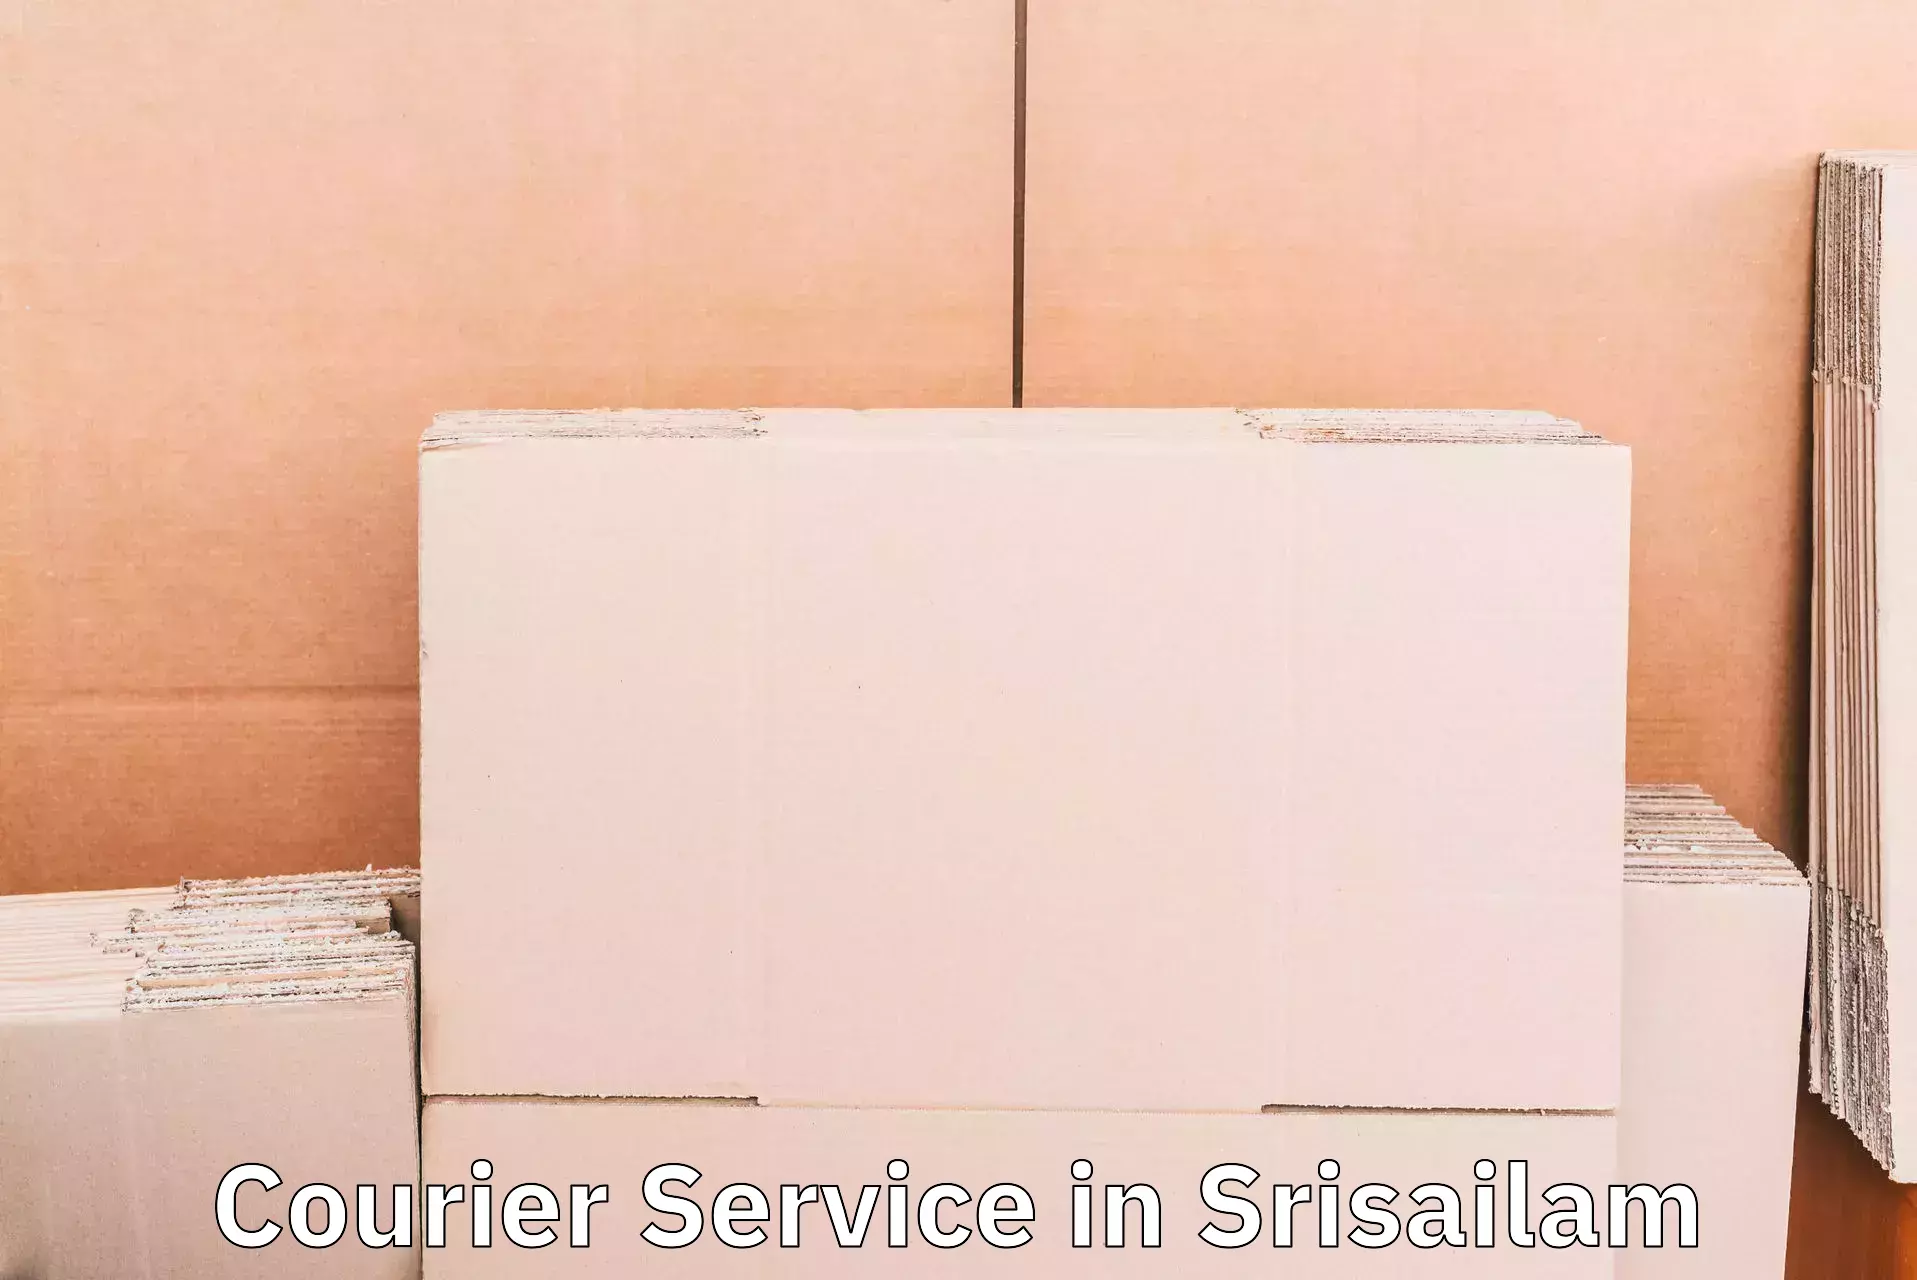 Speedy delivery service in Srisailam